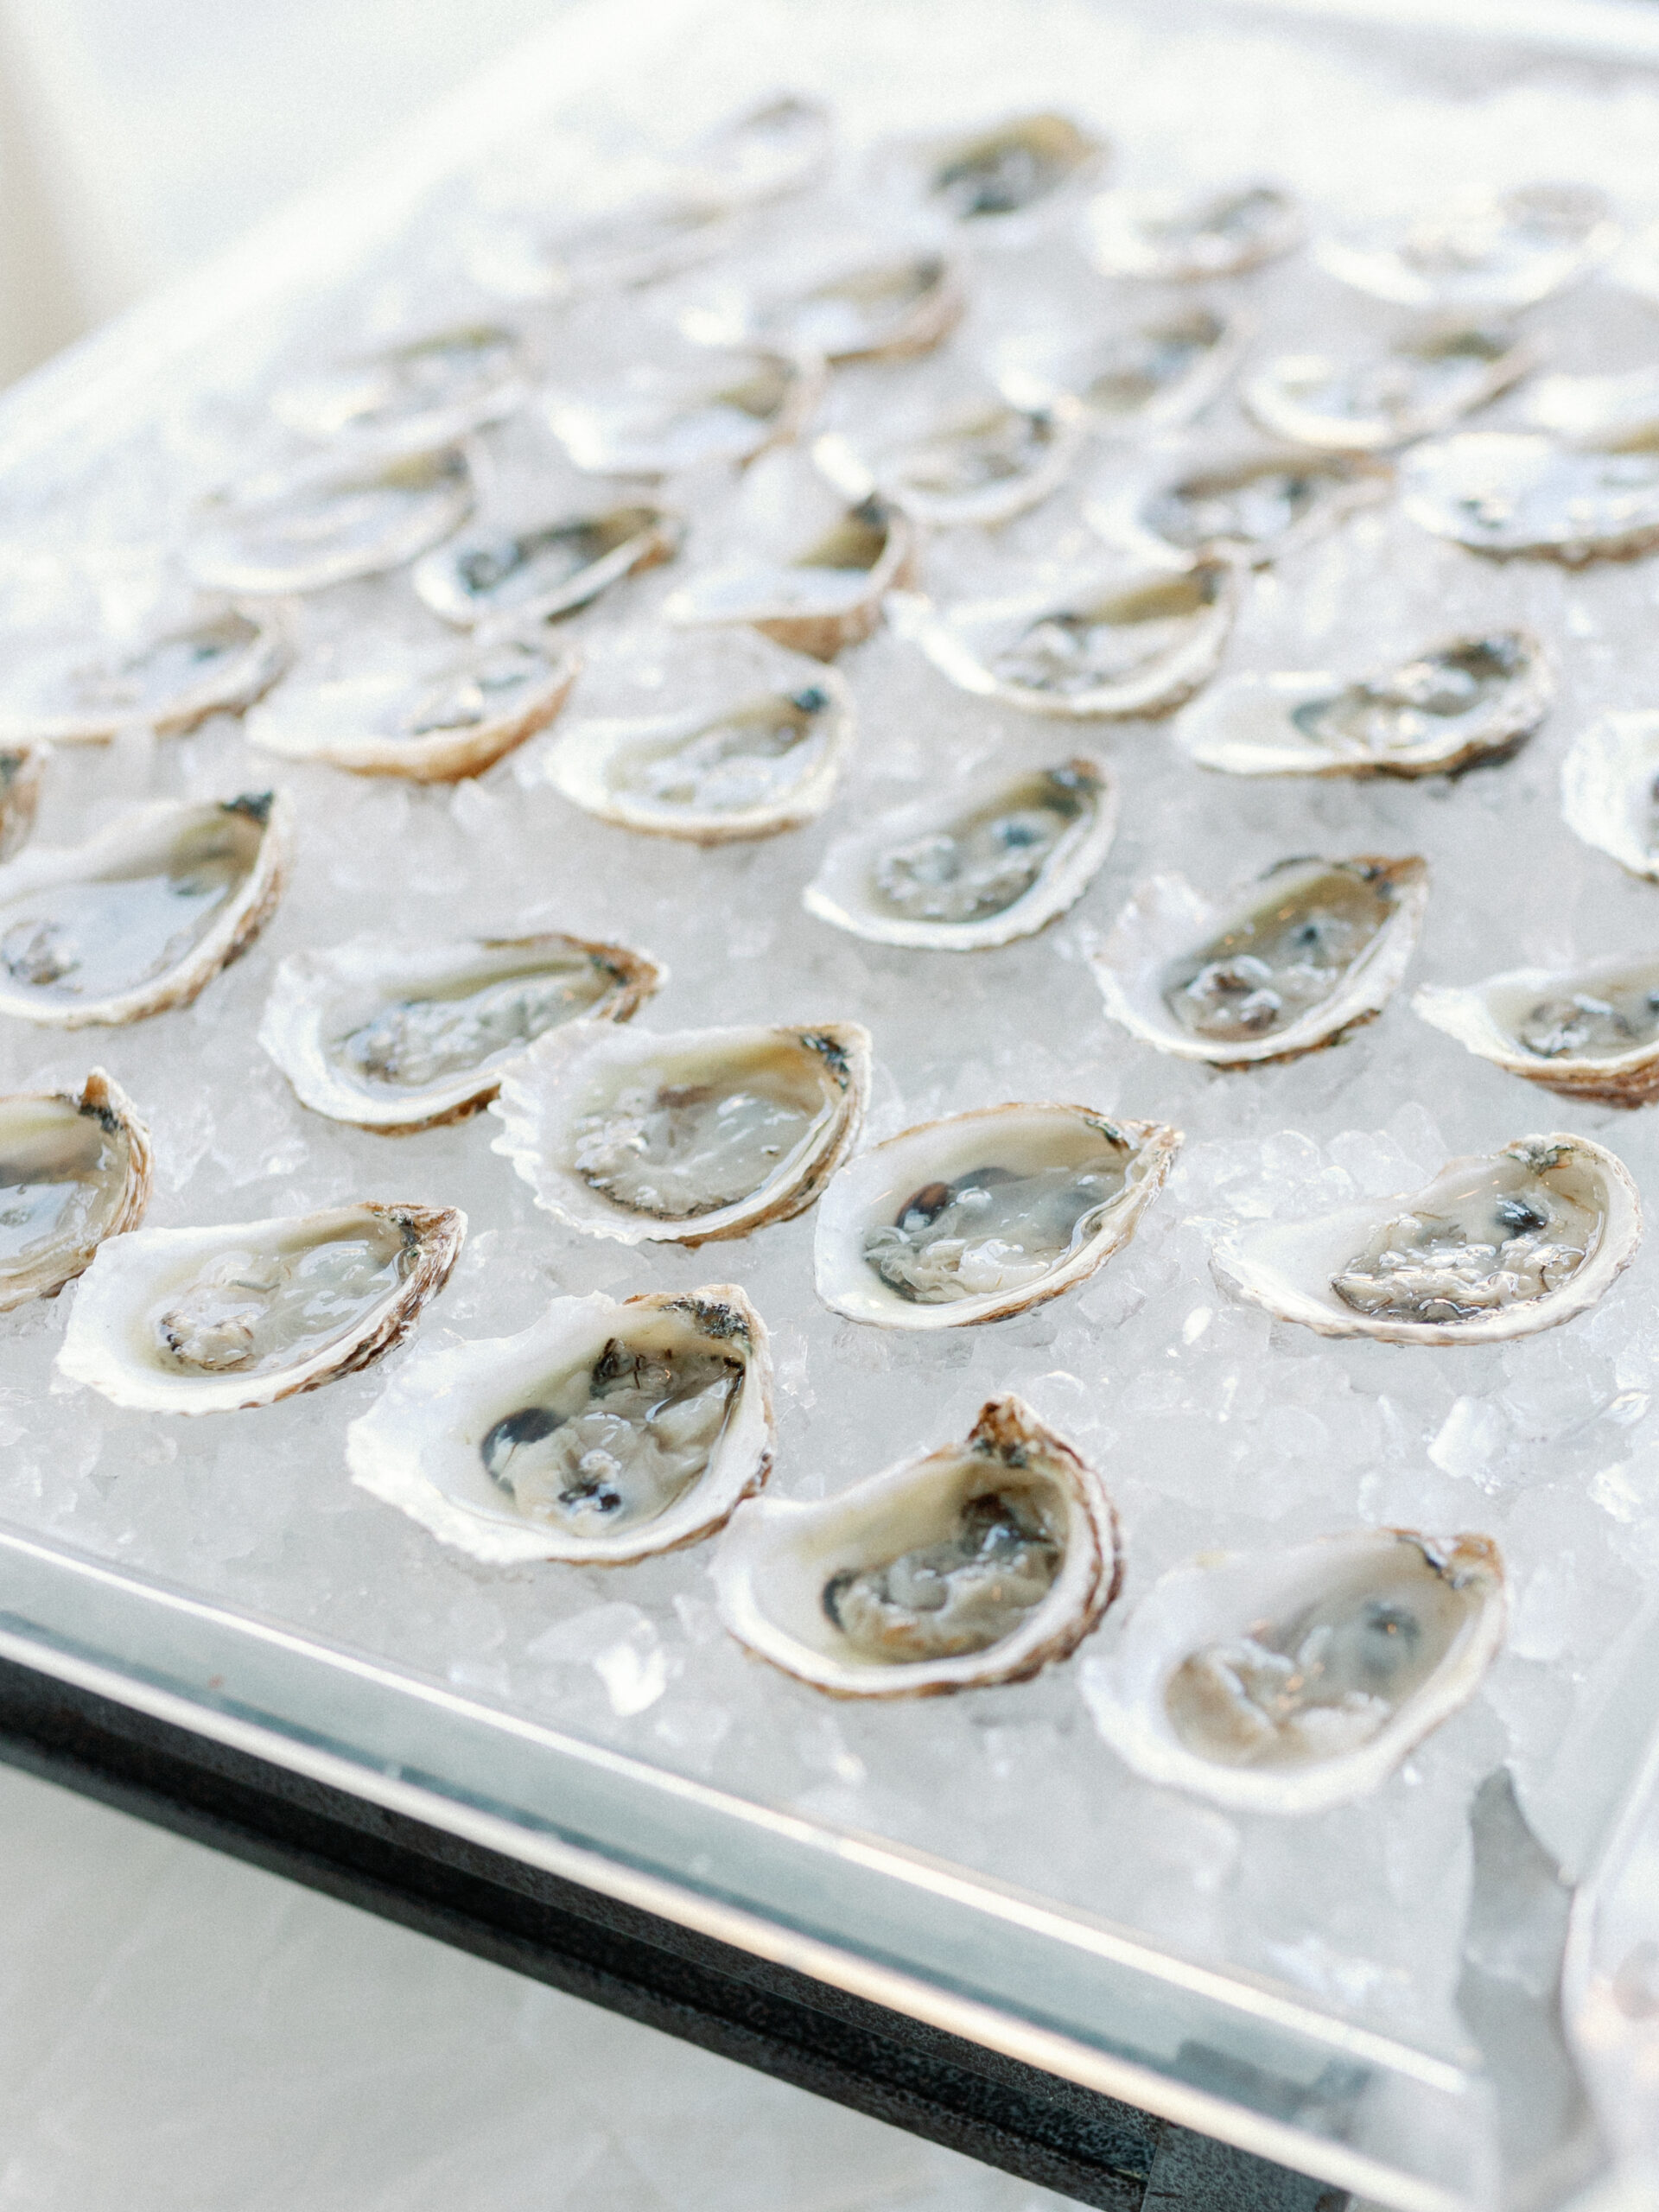 Close up of open oysters on ice 